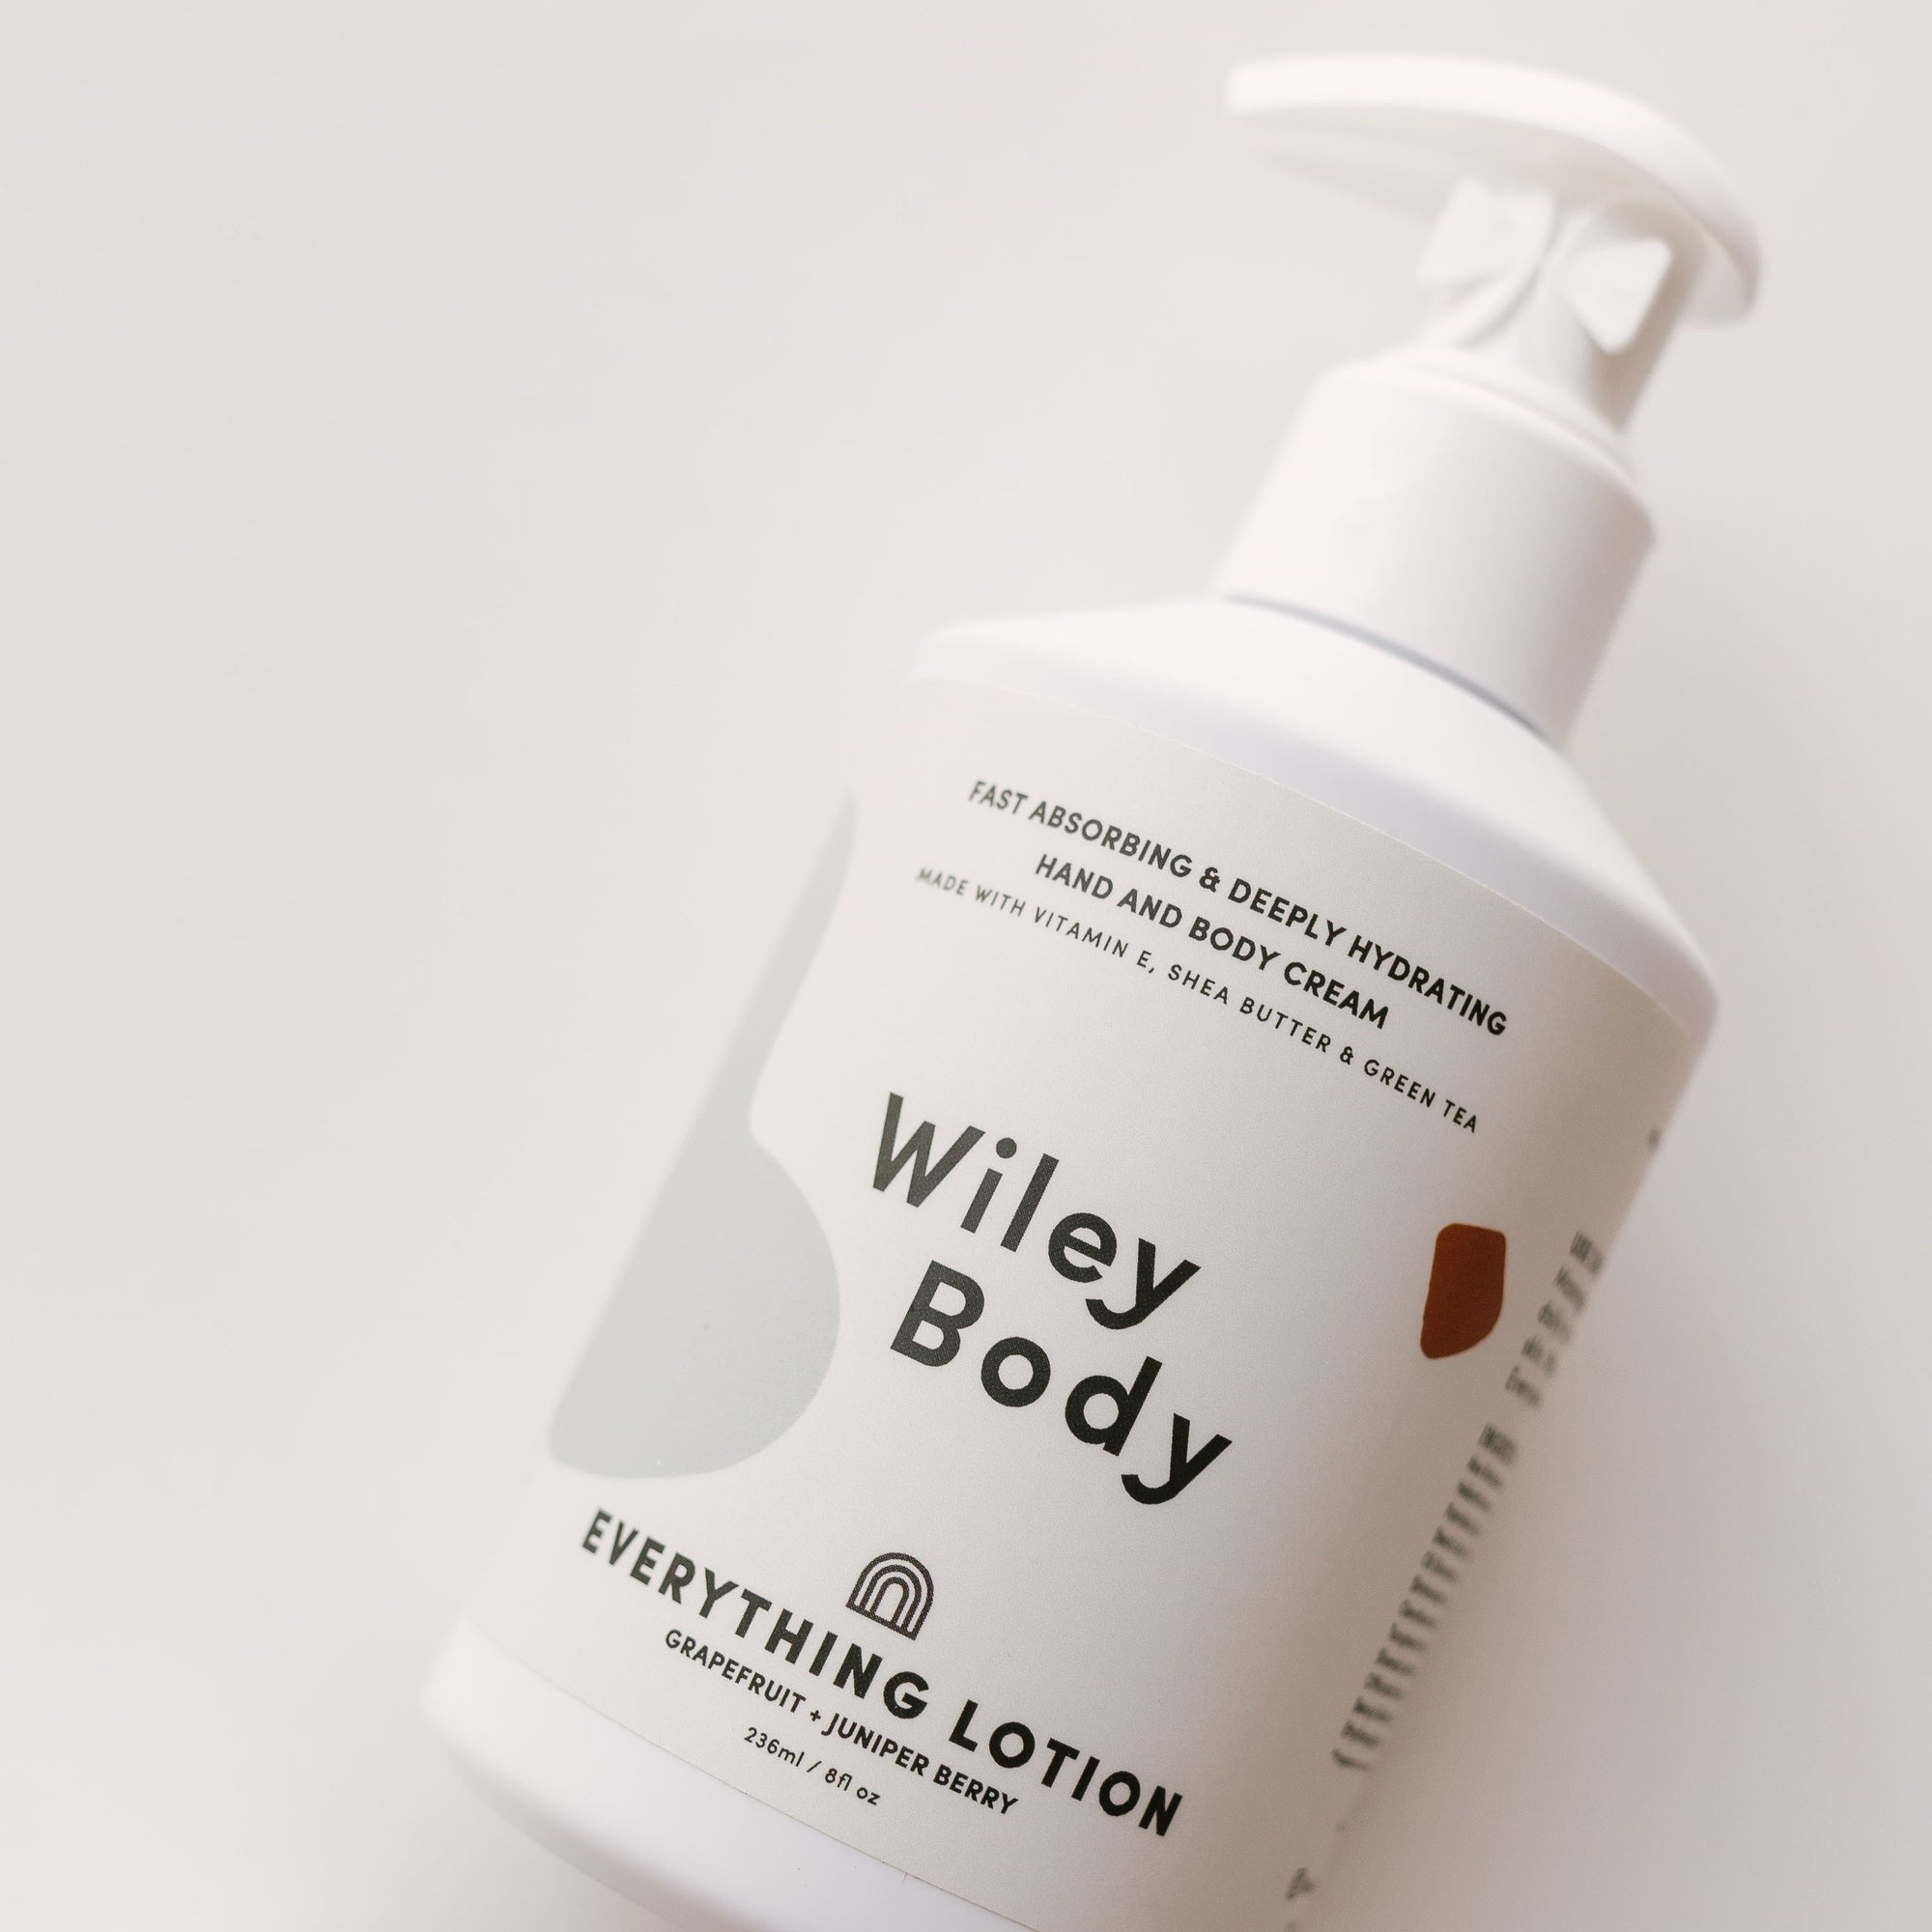 A bottle of Wiley Body's everything lotion on a white surface.